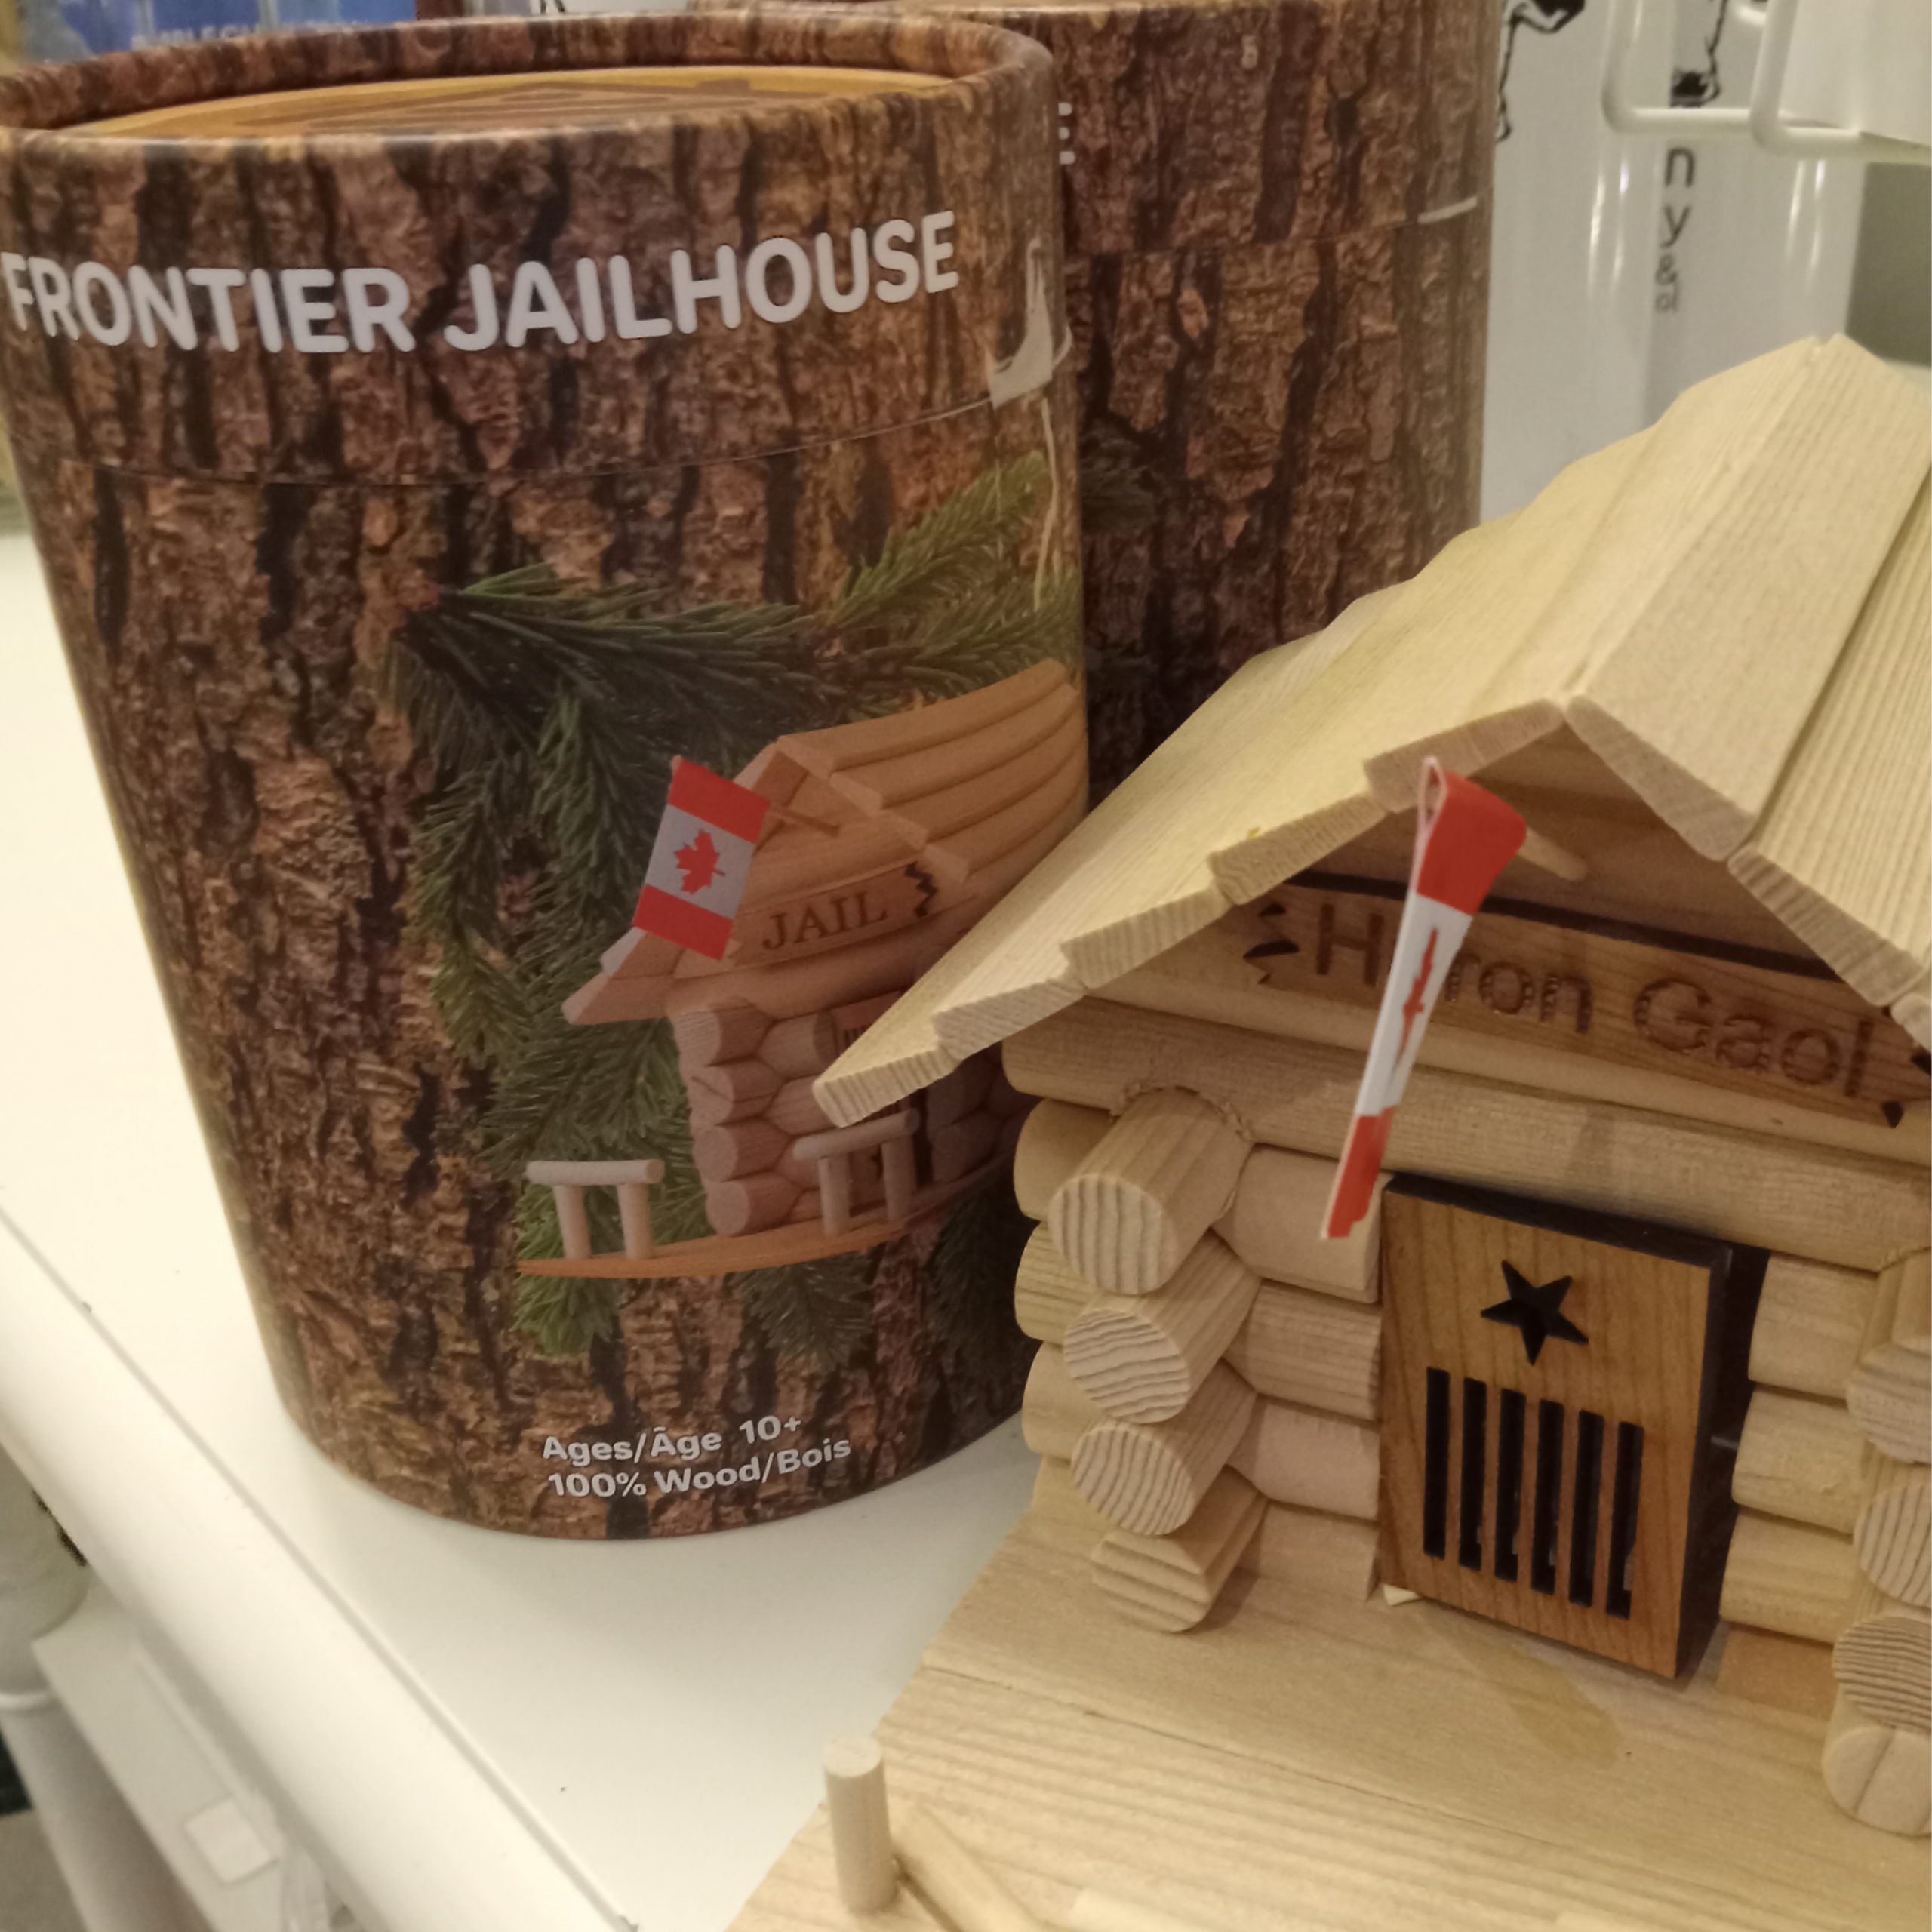 Image of the Frontier Jailhouse log cabin kit with completed version of the kit.